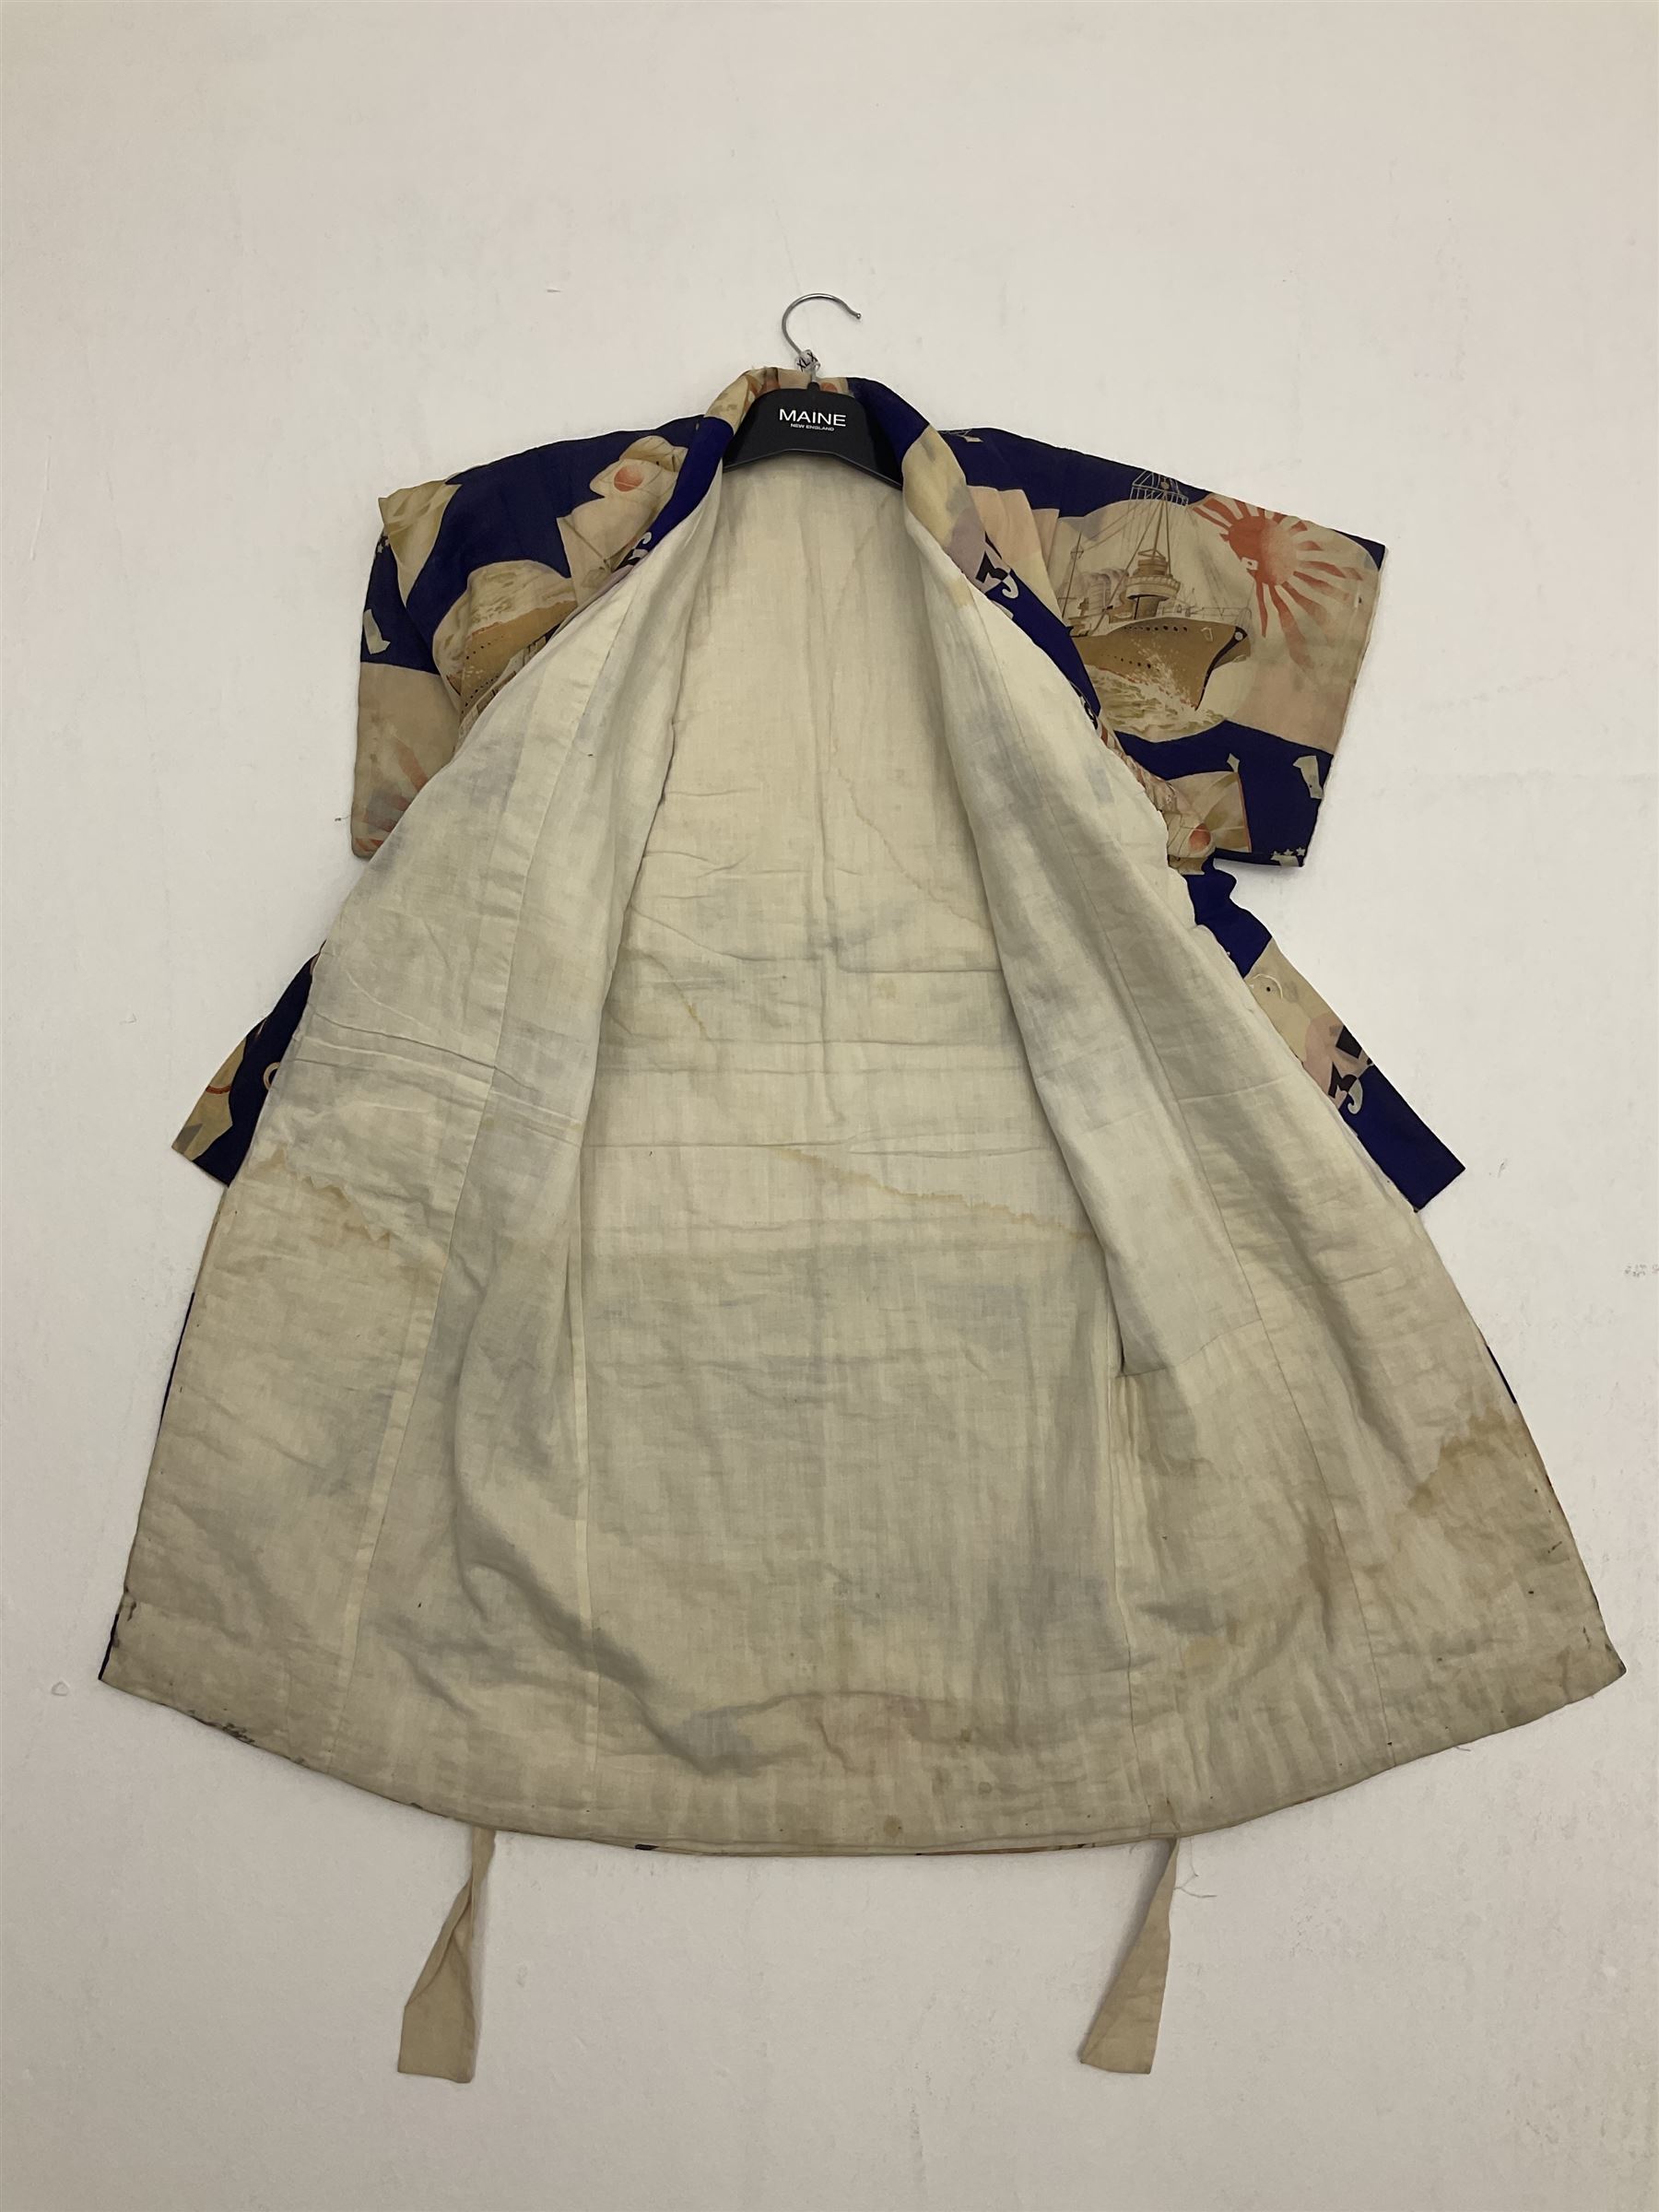 1930s Japanese fully lined kimono decorated with Japanese naval vessels and bi-planes - Image 6 of 24